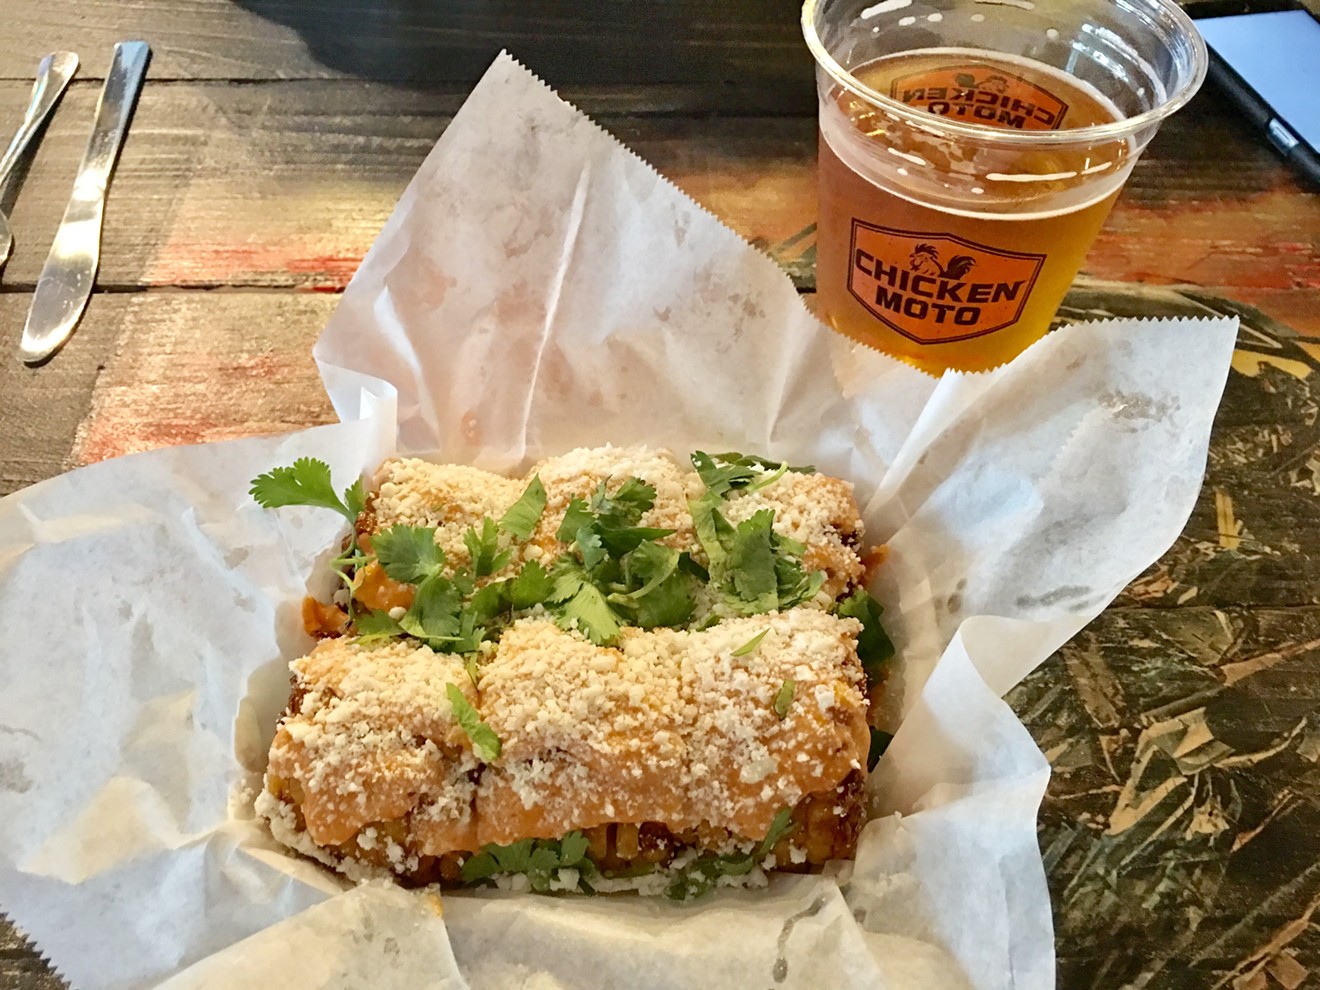 Chicken Moto's Texas-Korea fusion is most apparent in the elotes, made with Korean pepper-spiced mayonnaise and cotija cheese.